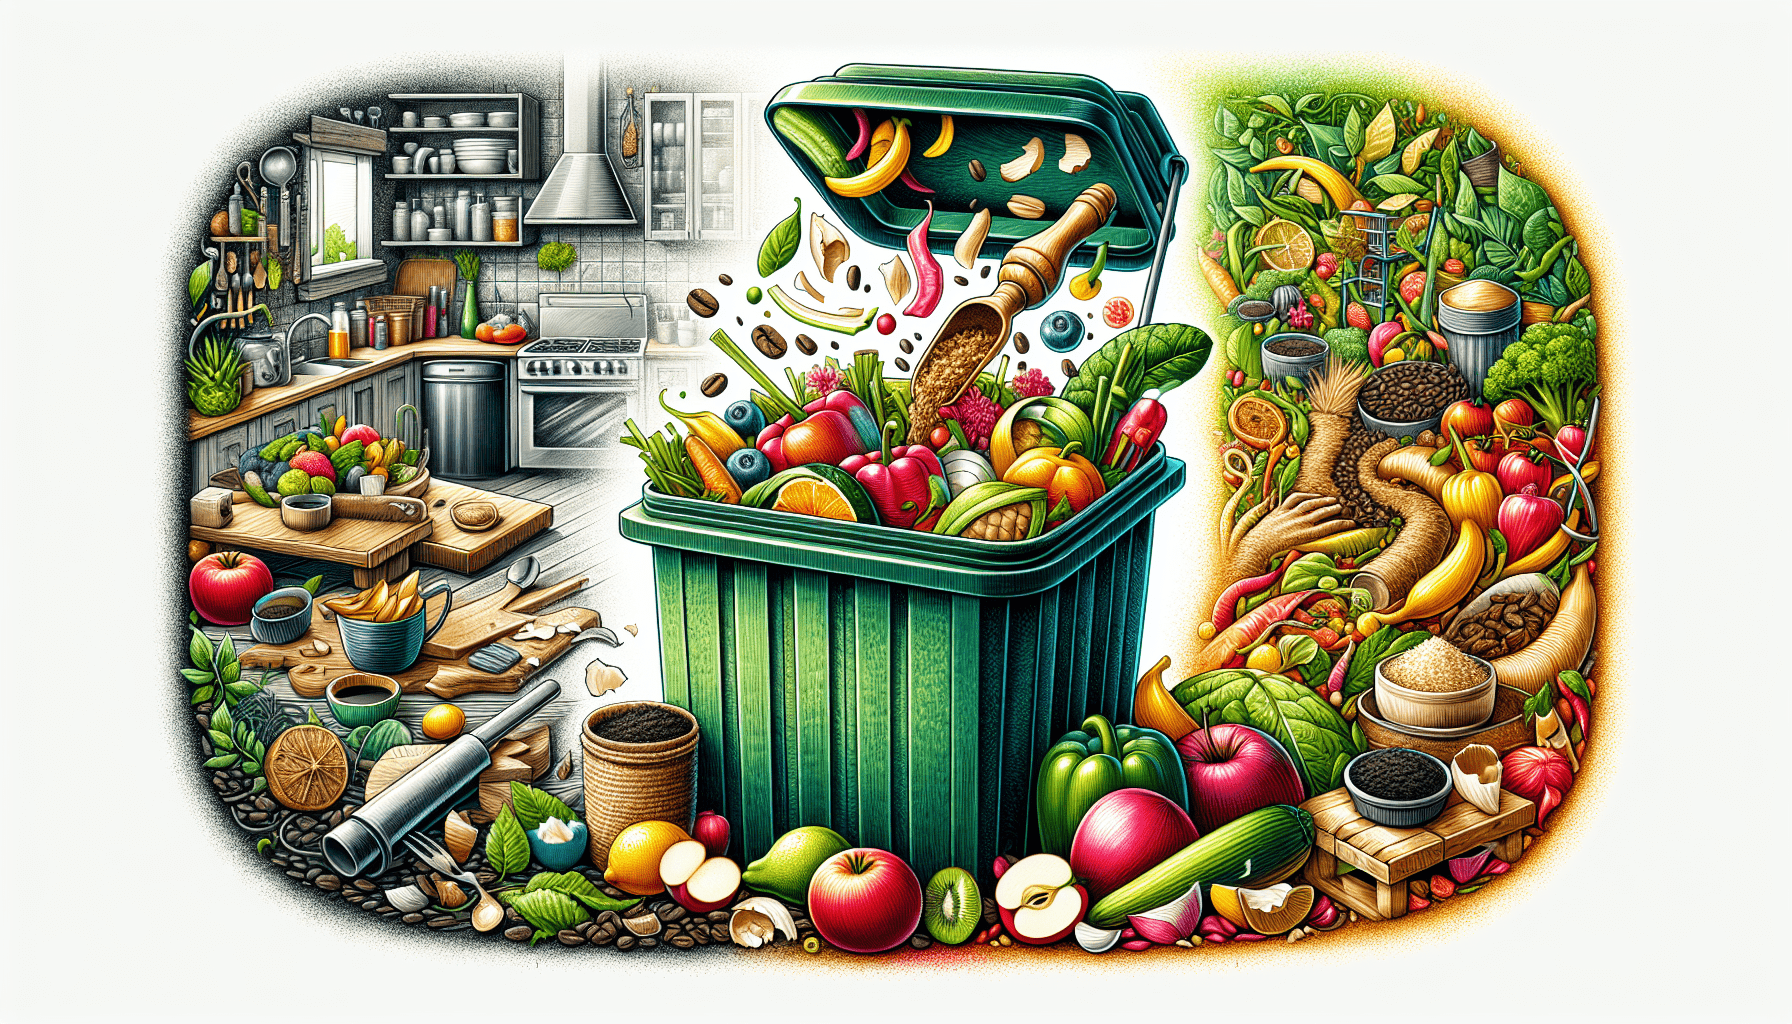 How Do I Make Composting A Part Of My Daily Routine?